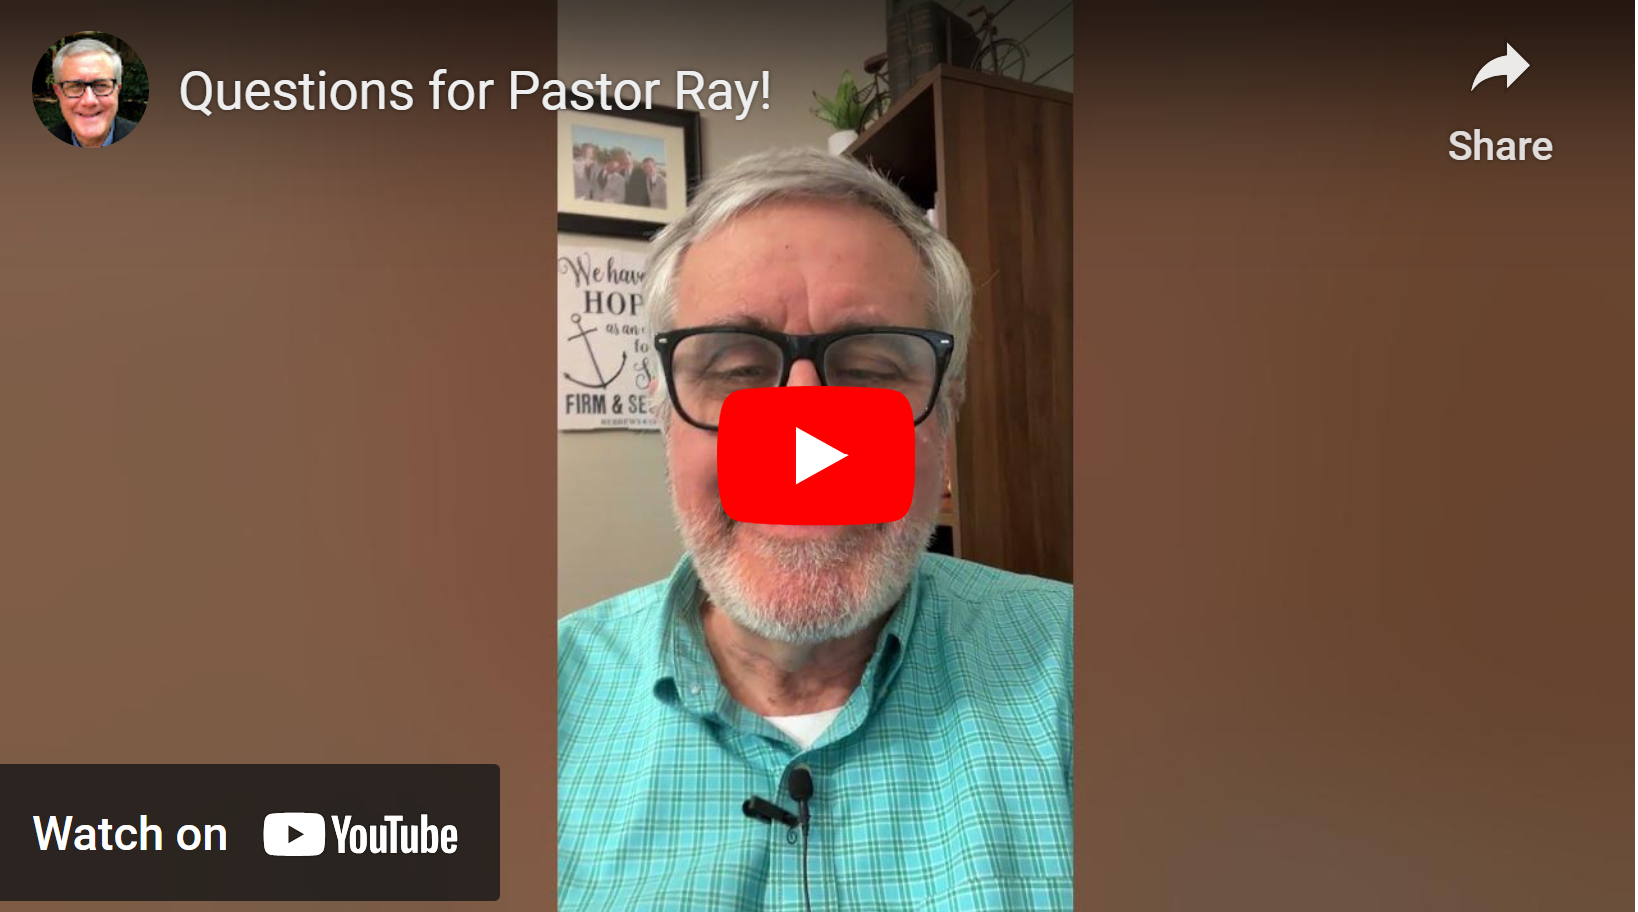 Questions for Pastor Ray Tuesday Night!